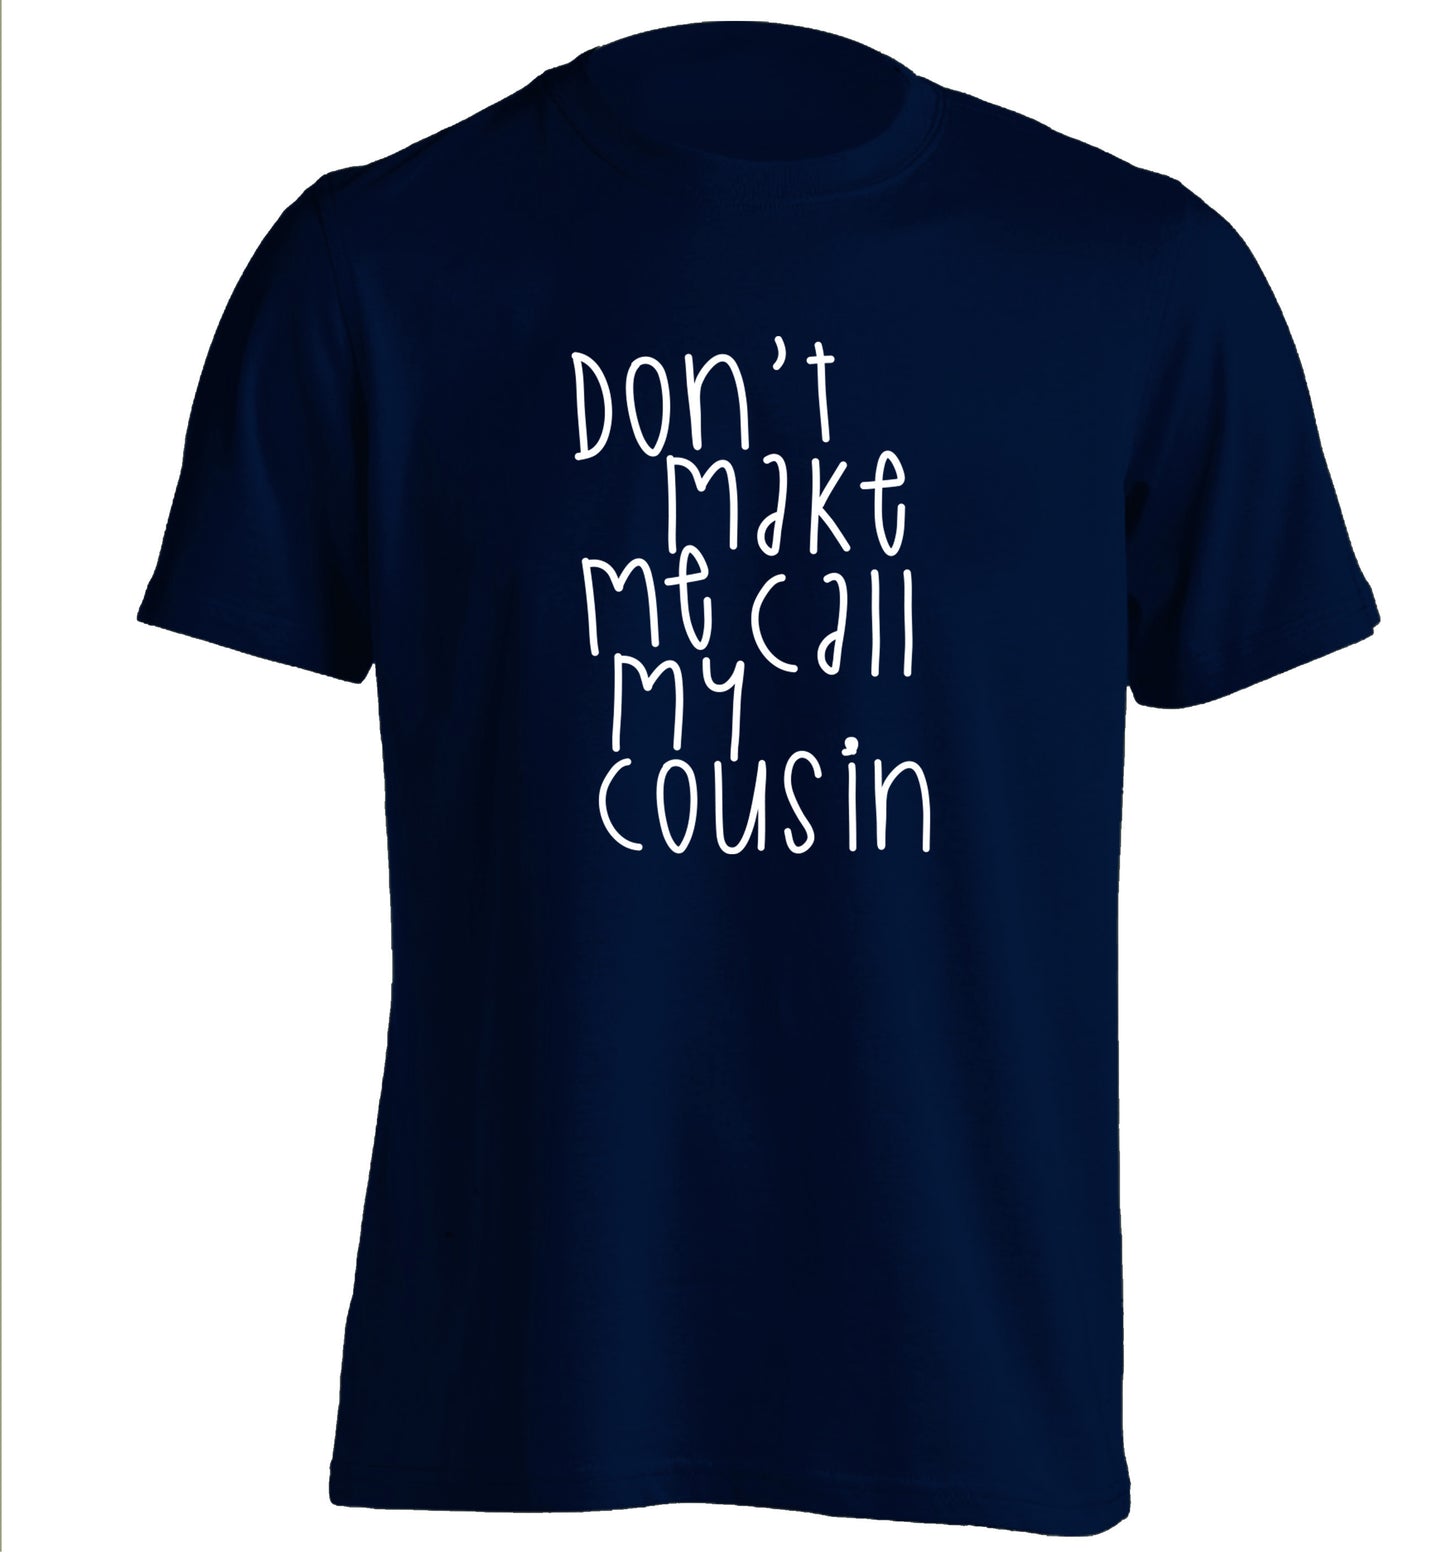 Don't make me call my cousin adults unisex navy Tshirt 2XL